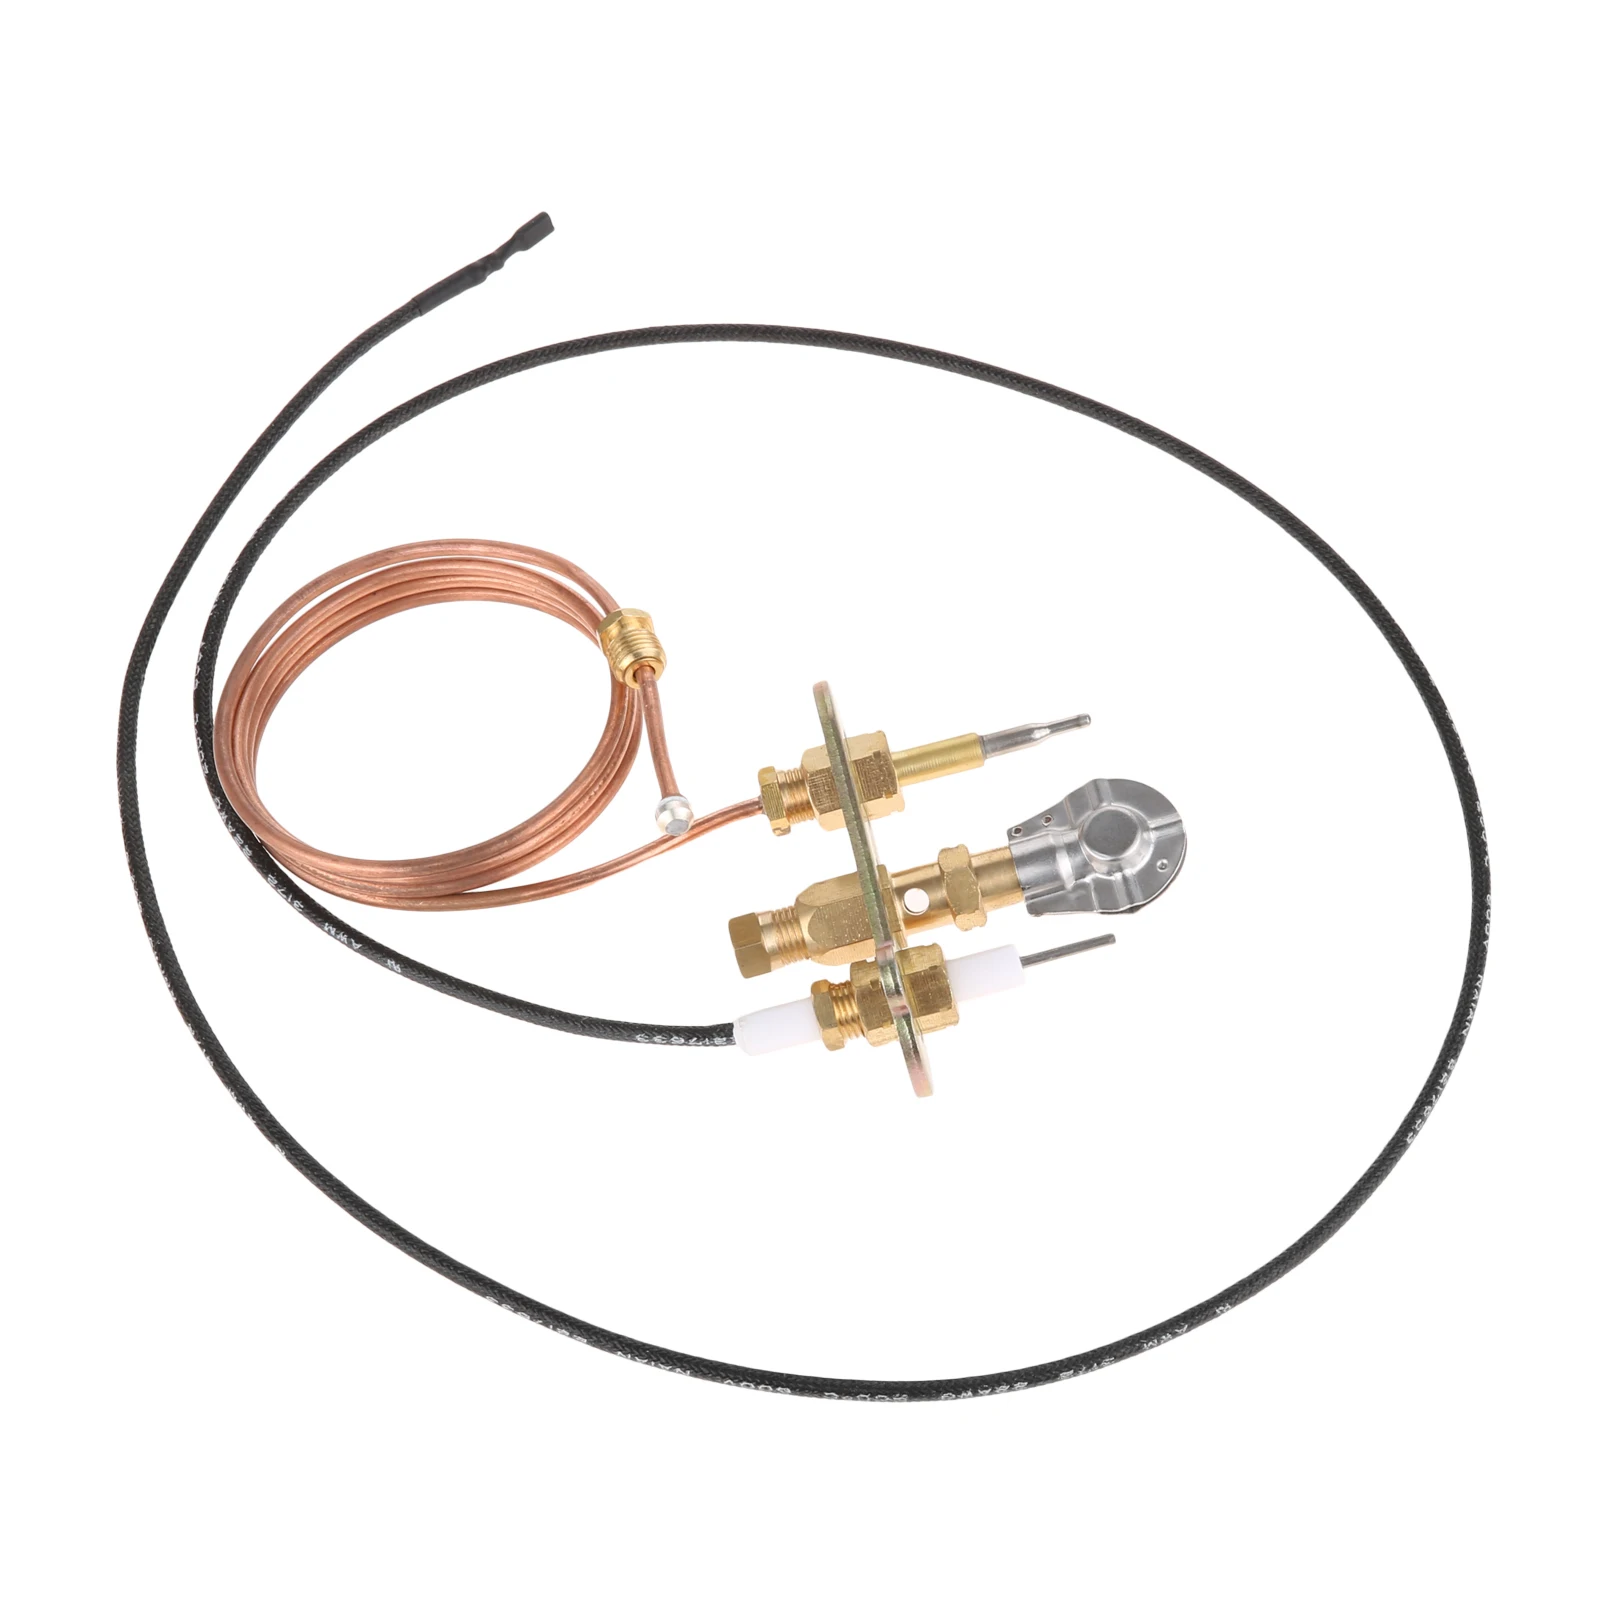 

Liquefied Gas M8*1 Thermocouple + Ignition 900mm Pilot Burner set fit for Replacement Fireplace/Thermocouple Gas Water Heater